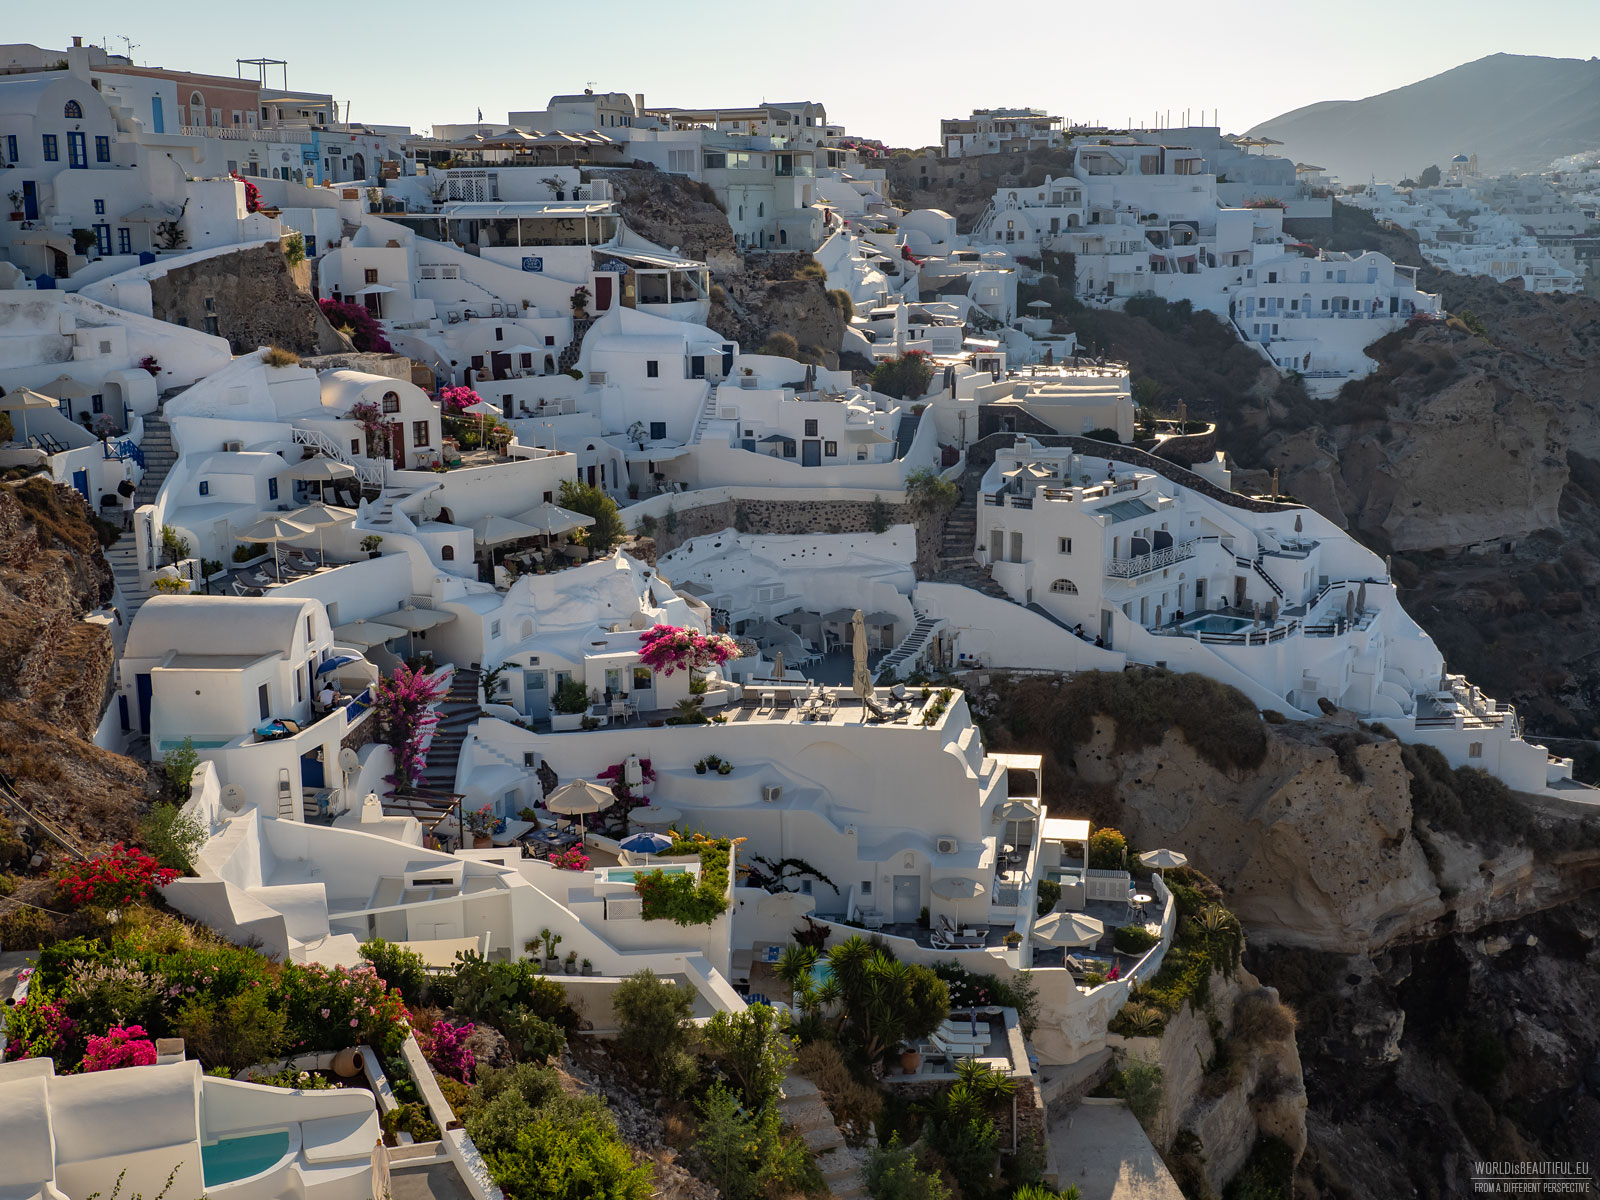 Hotels and apartments in Oia